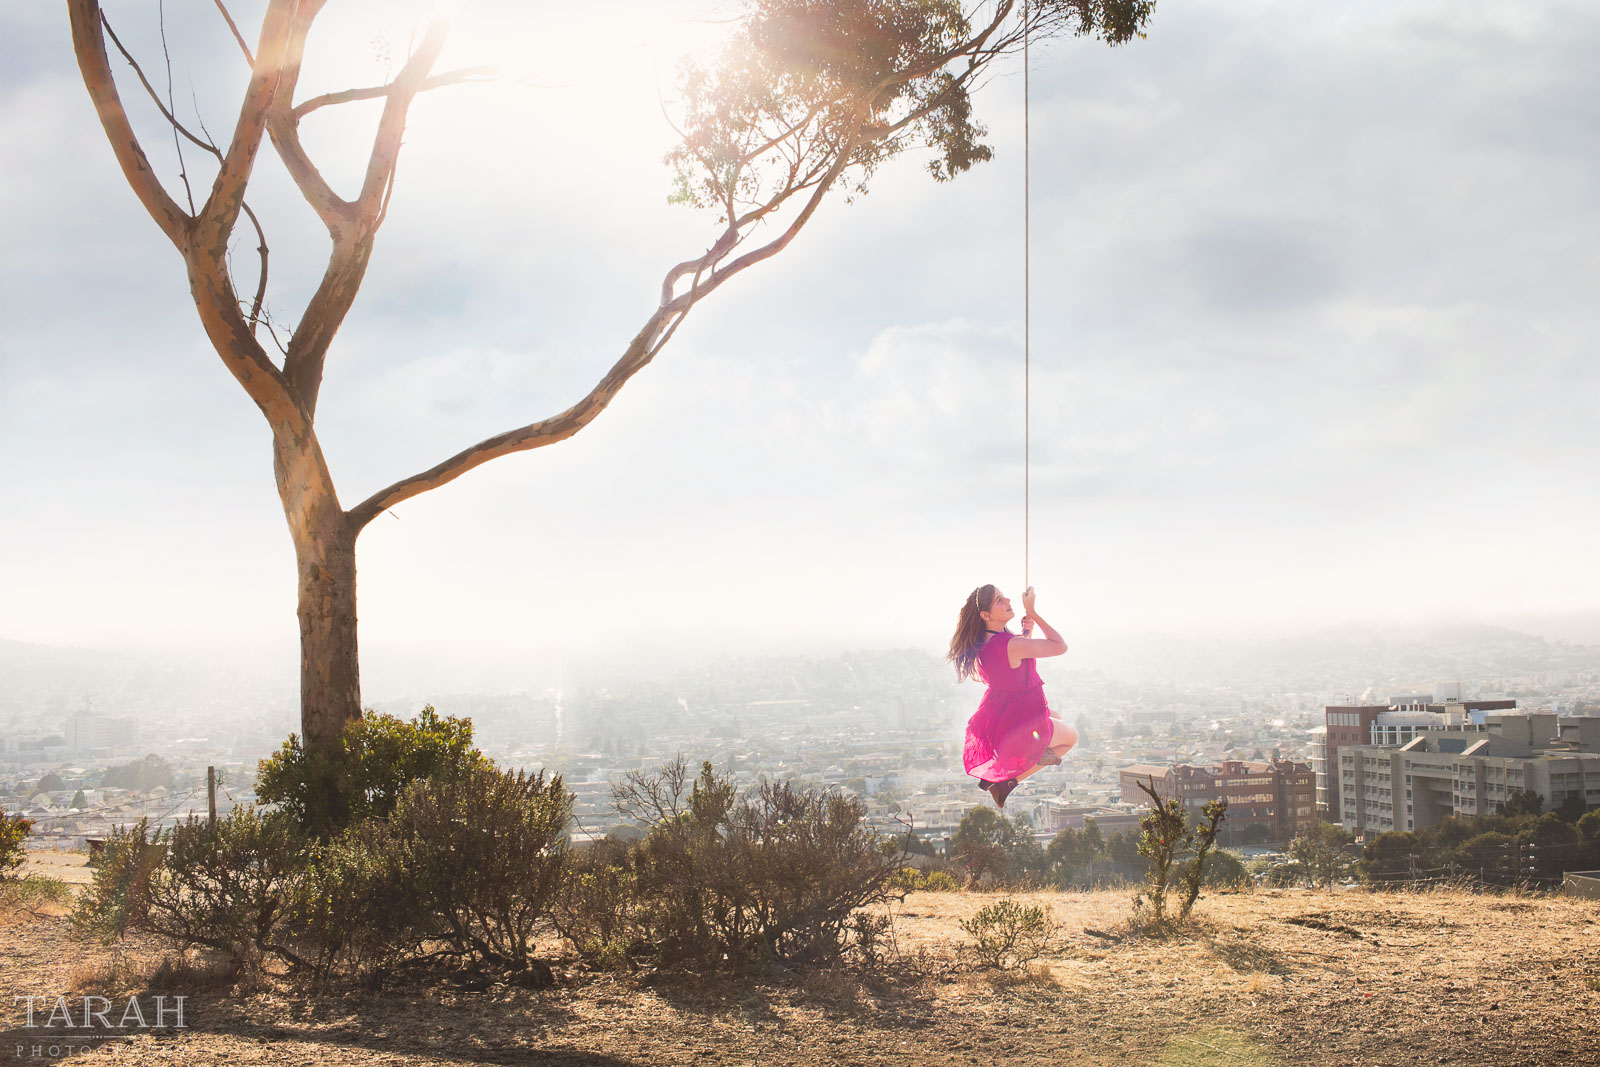 photo of girl on a swing overlooking San Francisco by Tarah Beaven